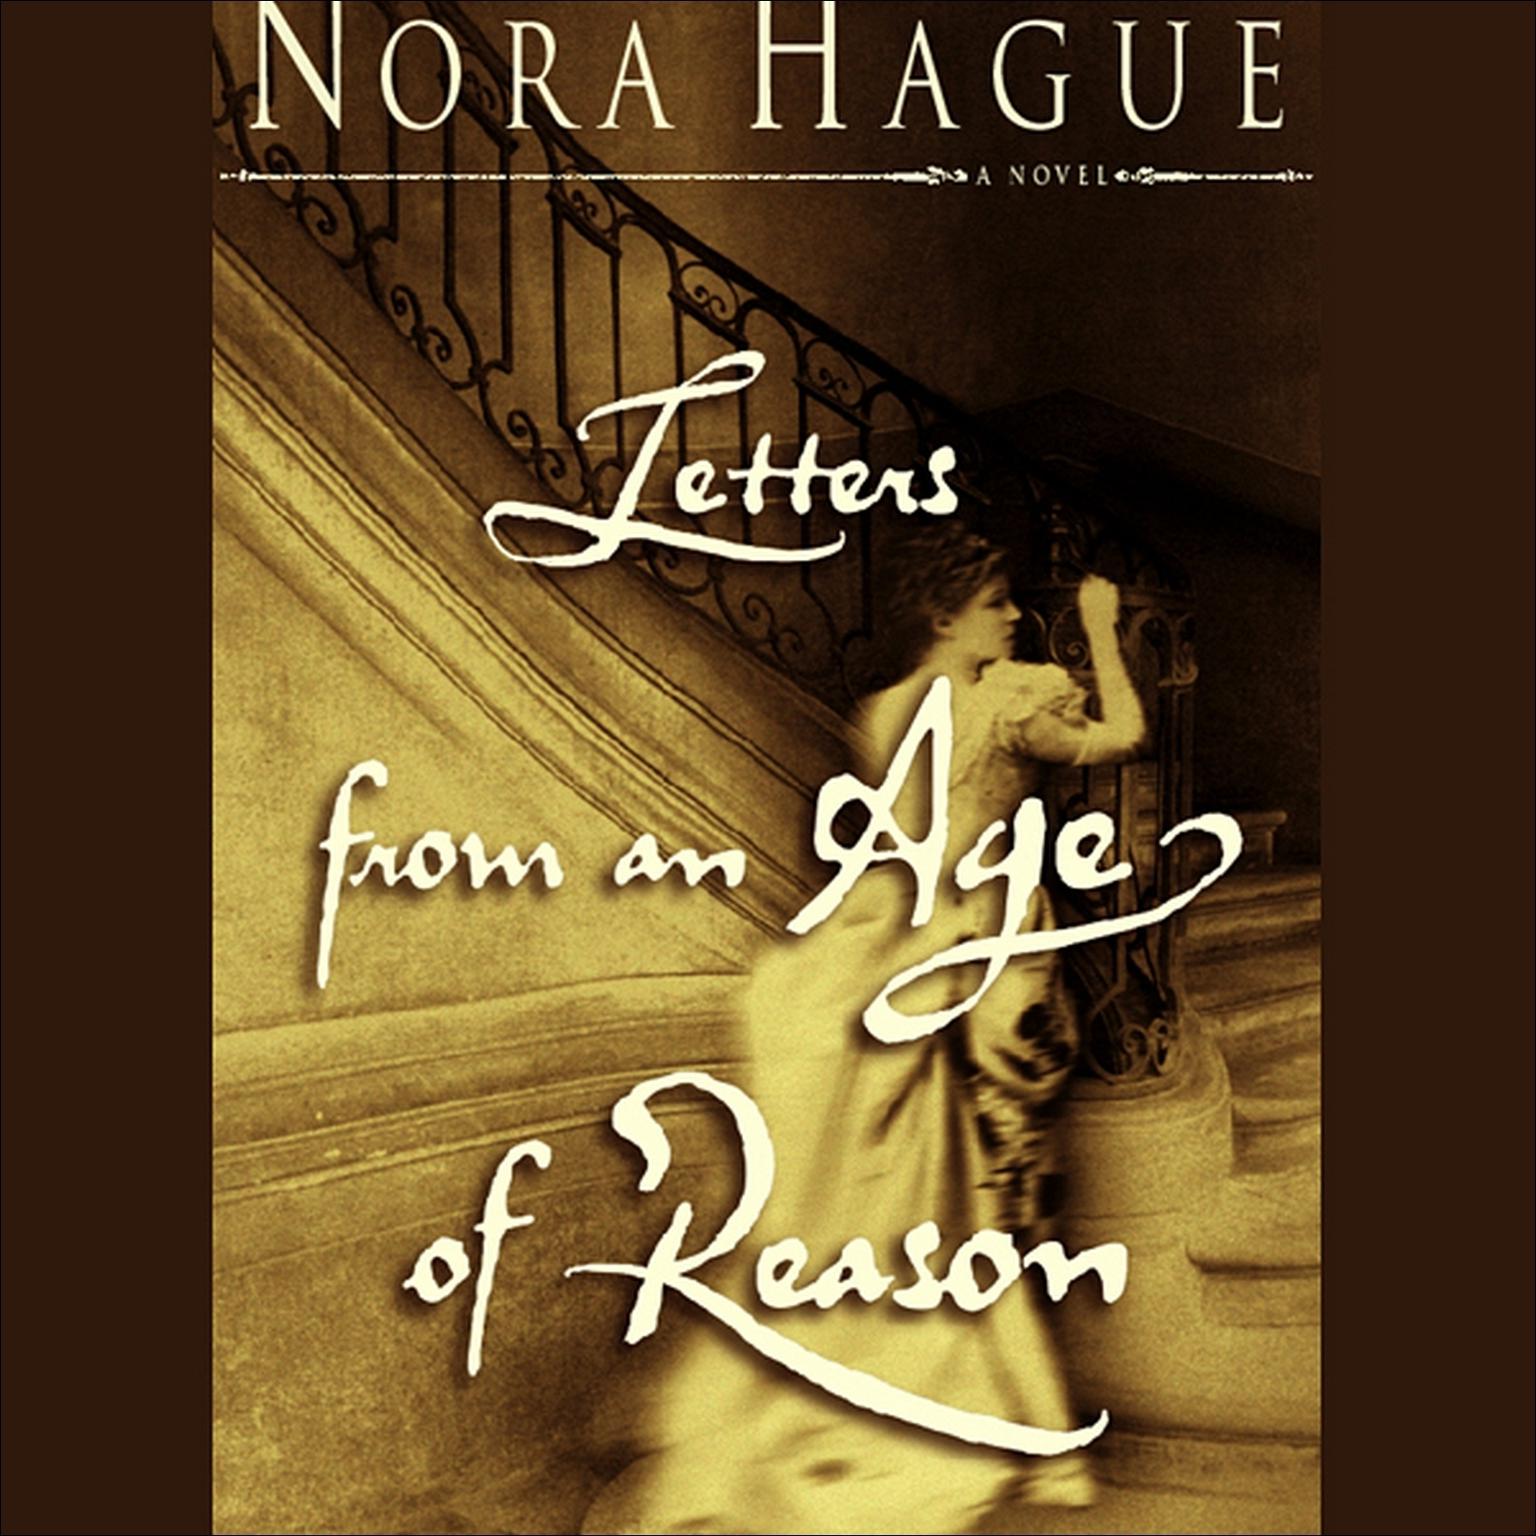 Letters from an Age of Reason (Abridged): A Novel Audiobook, by Nora Hague